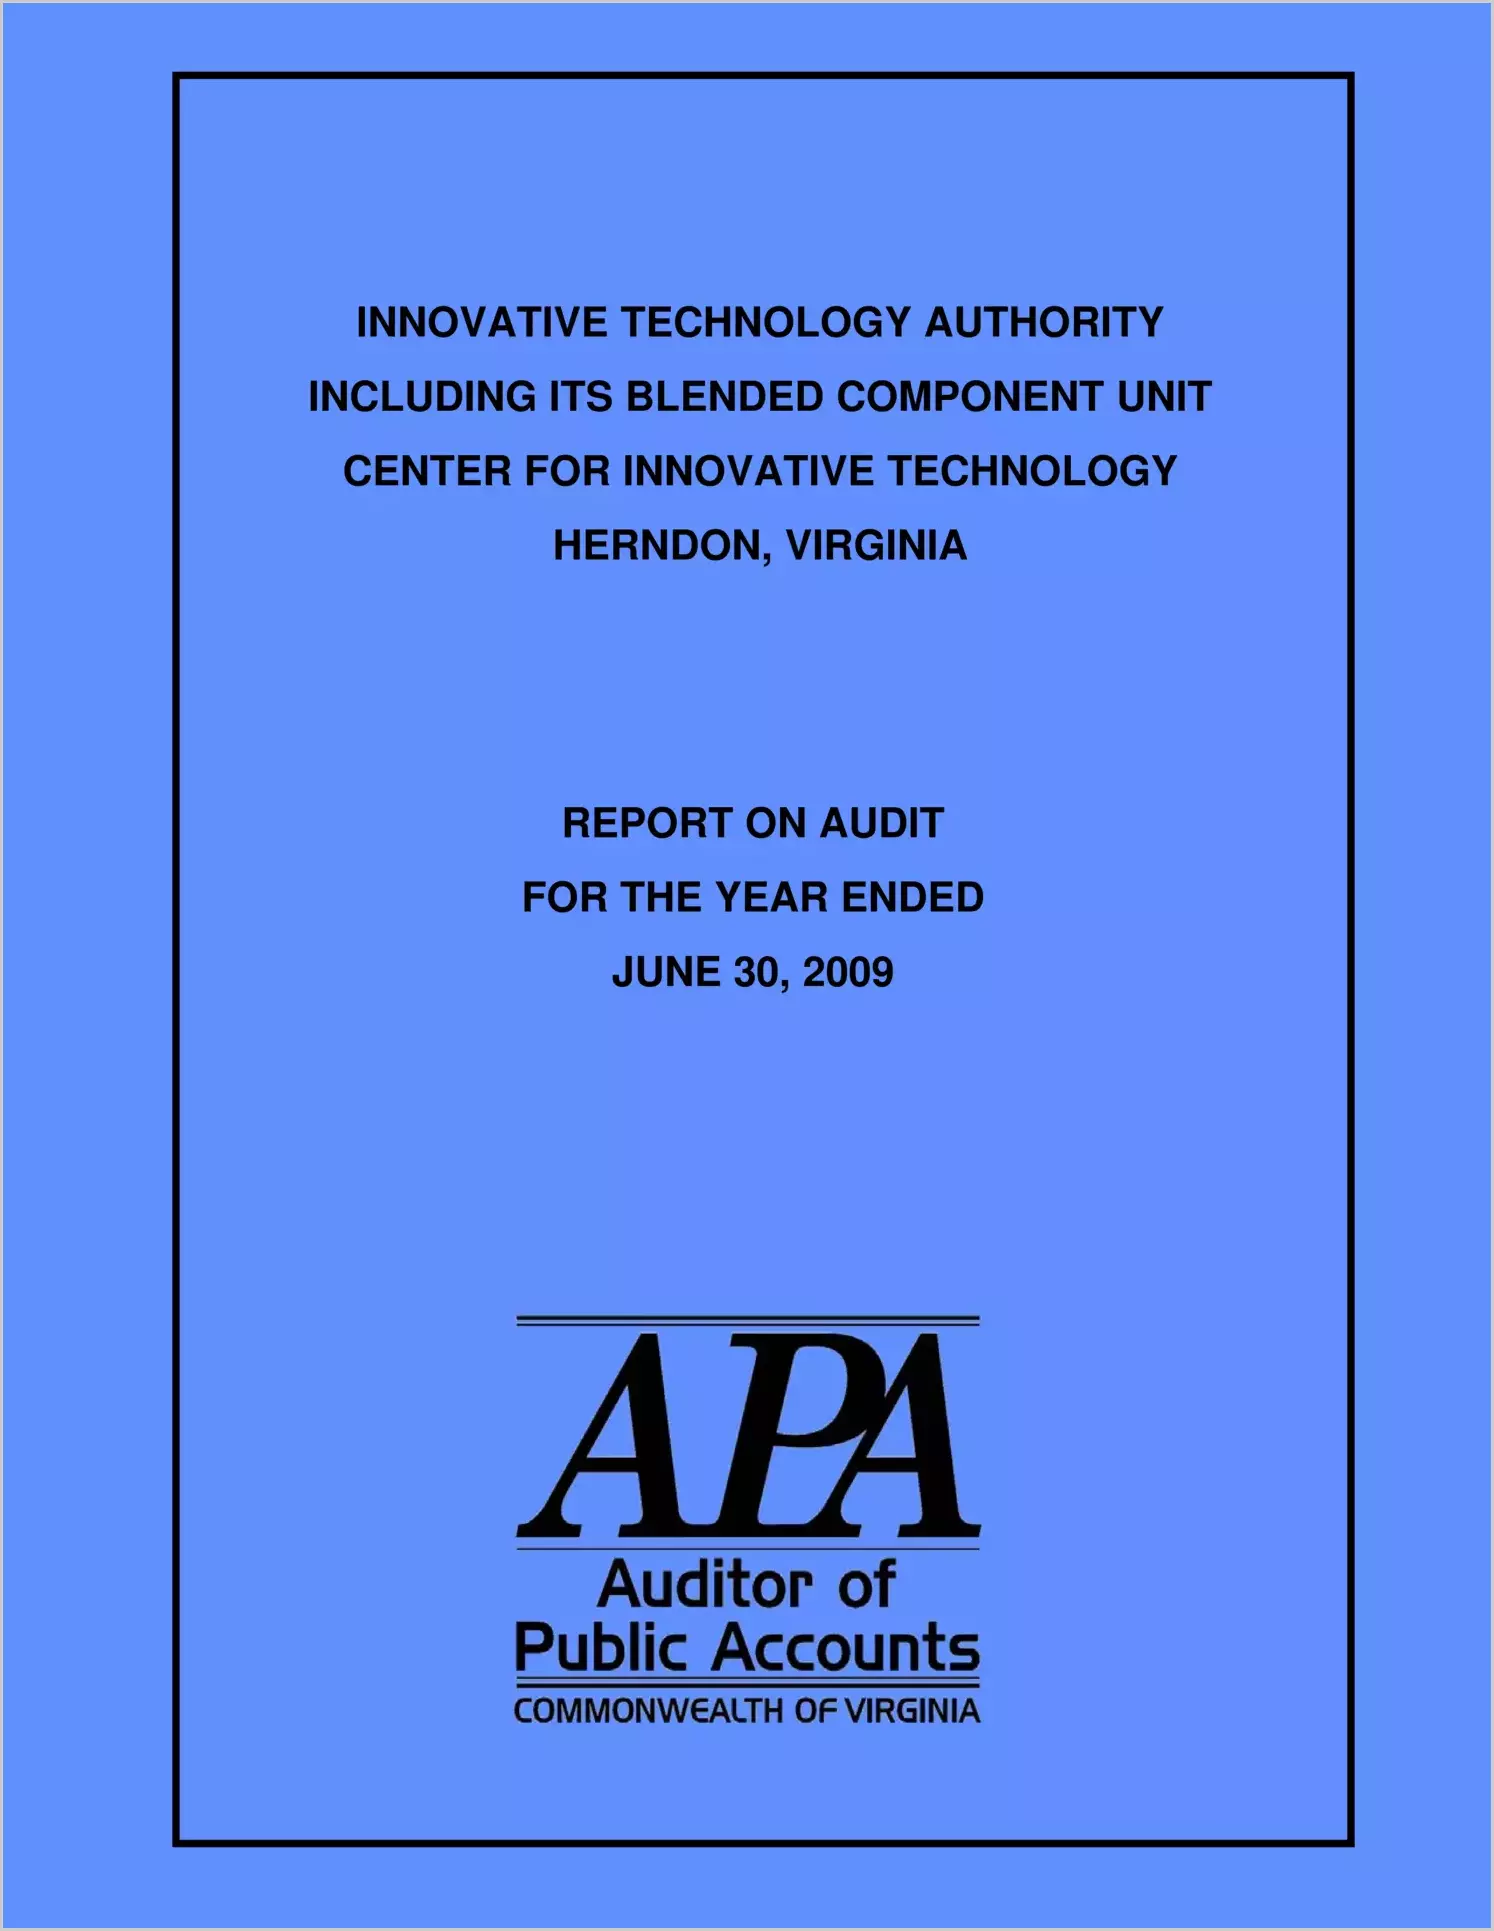 The Innovative Technology Authority Including Its Blended Component Unit Center for Innovative Technology for the year ended June 30, 2009